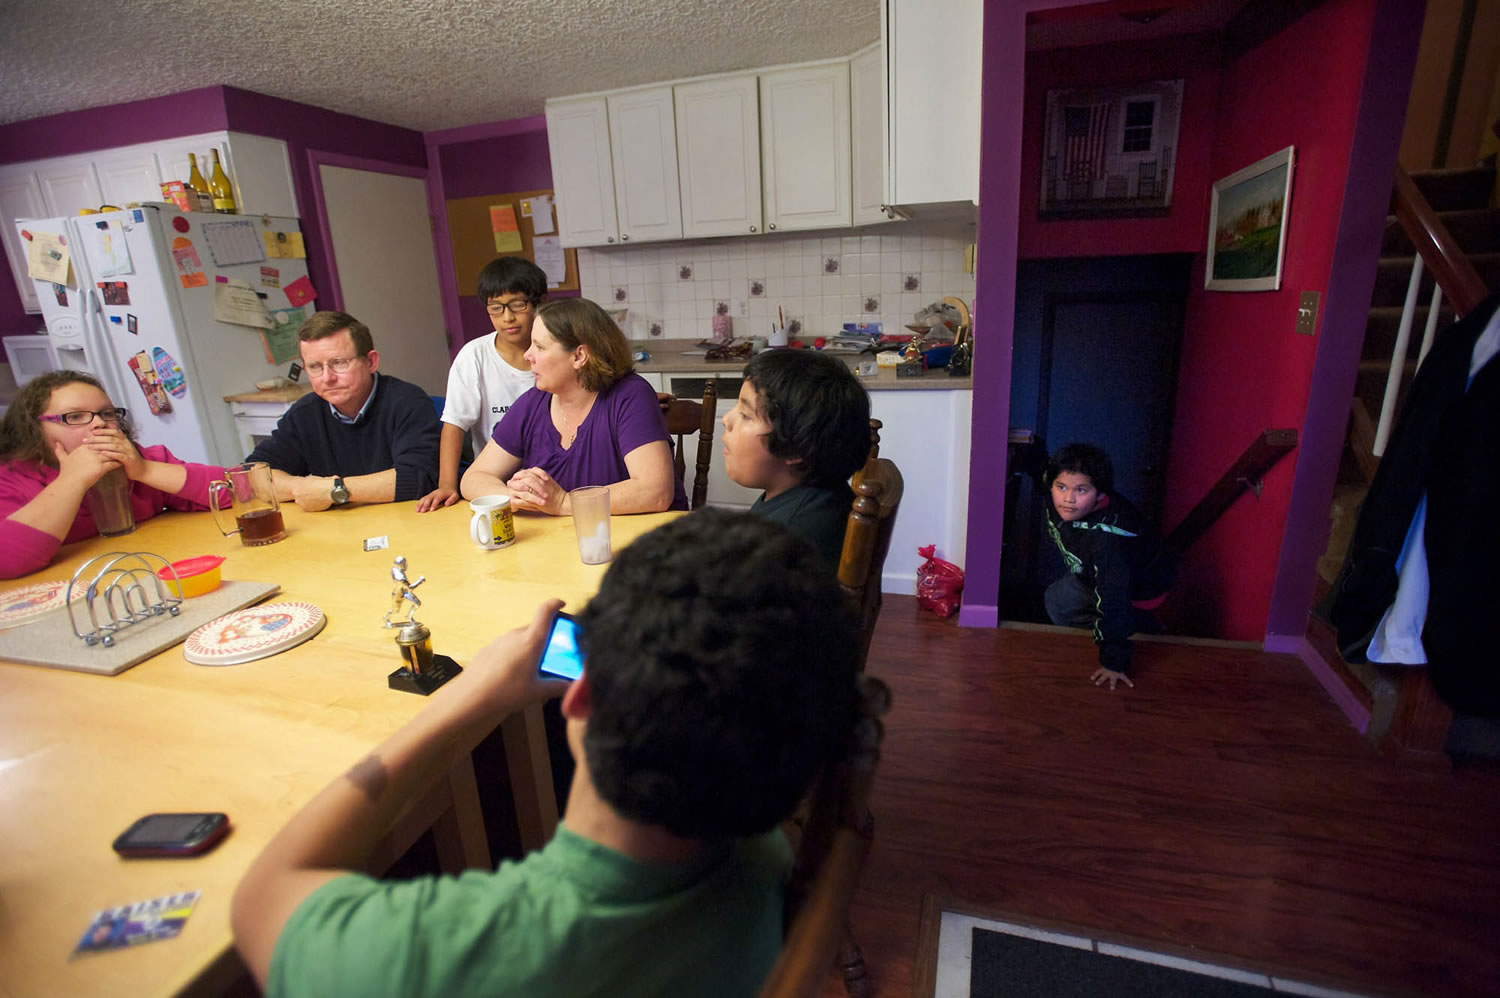 The Anders family (from left around the table): Shelby, 12; dad Forest; Uriel, 10; mom Trina; Rene, 12; Deven, 12.